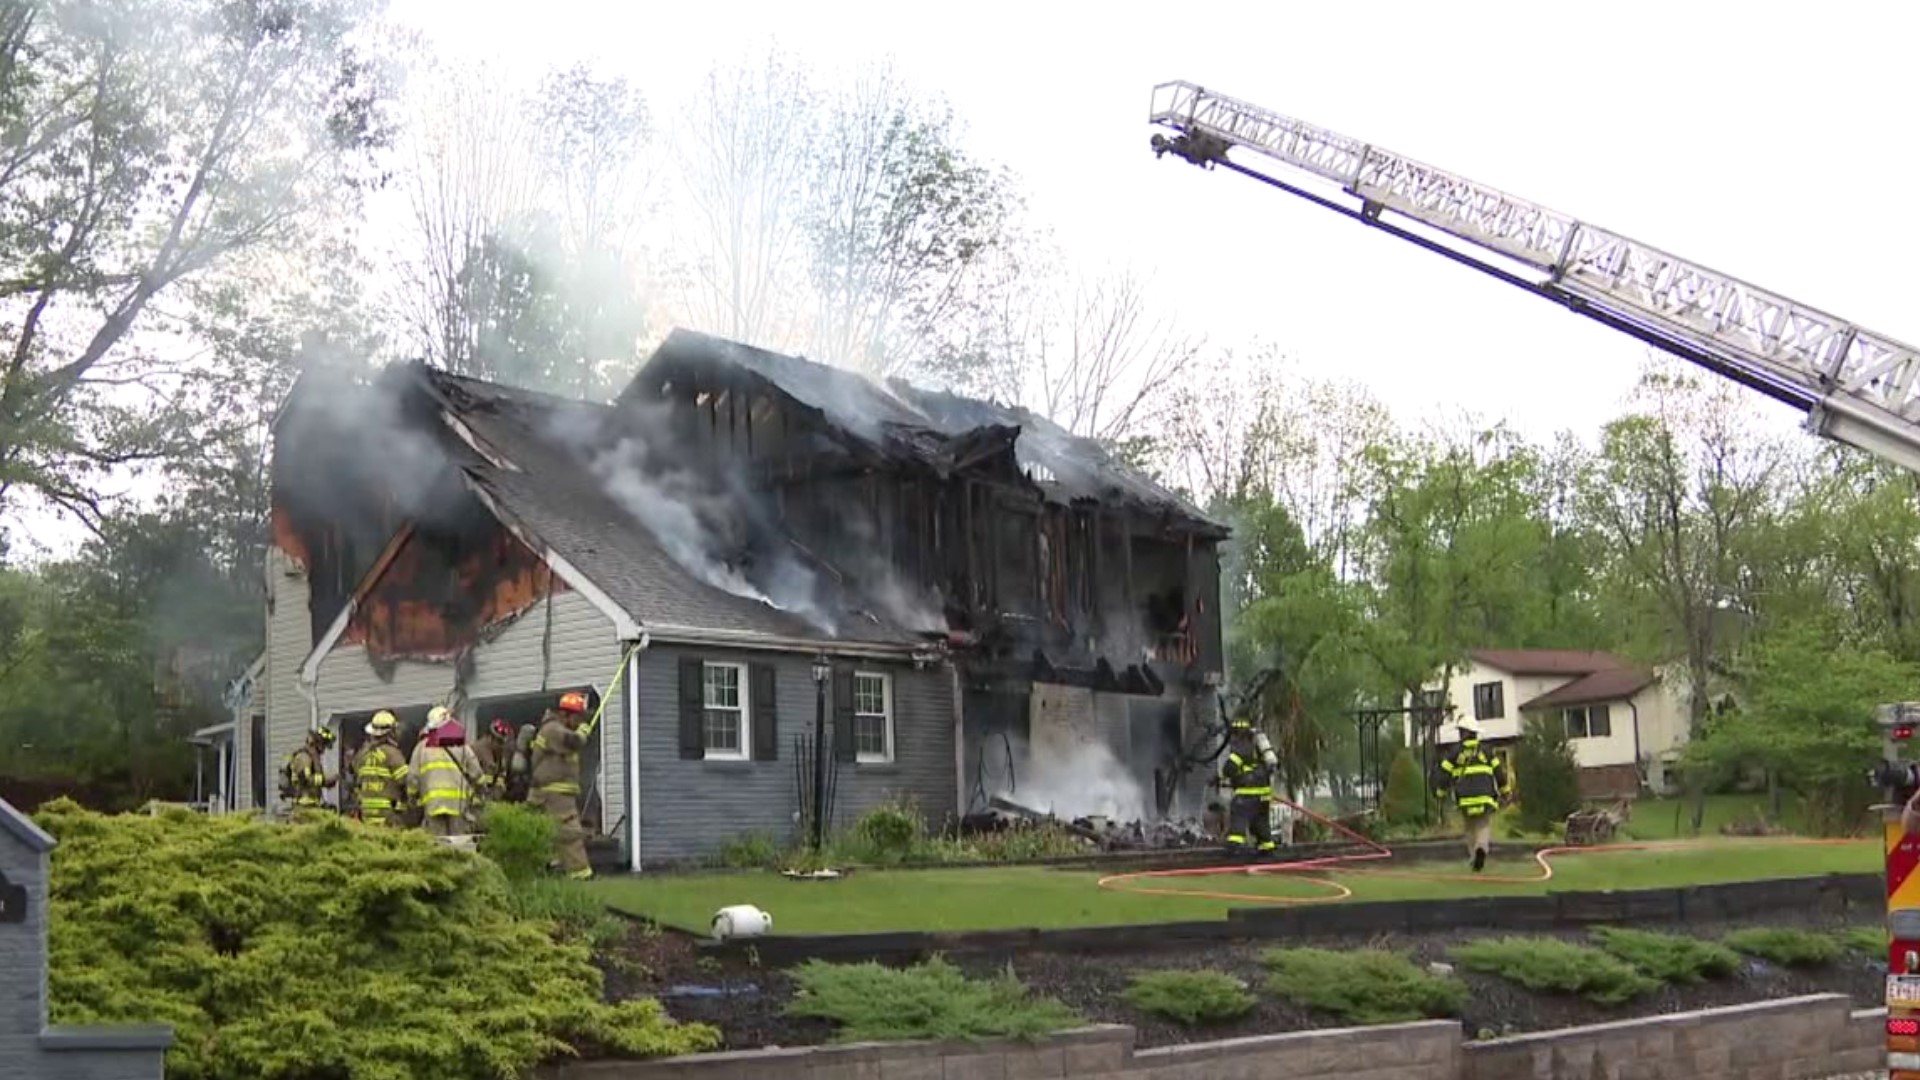 The fire started just before 2 p.m. in Smithfield Township Friday afternoon.